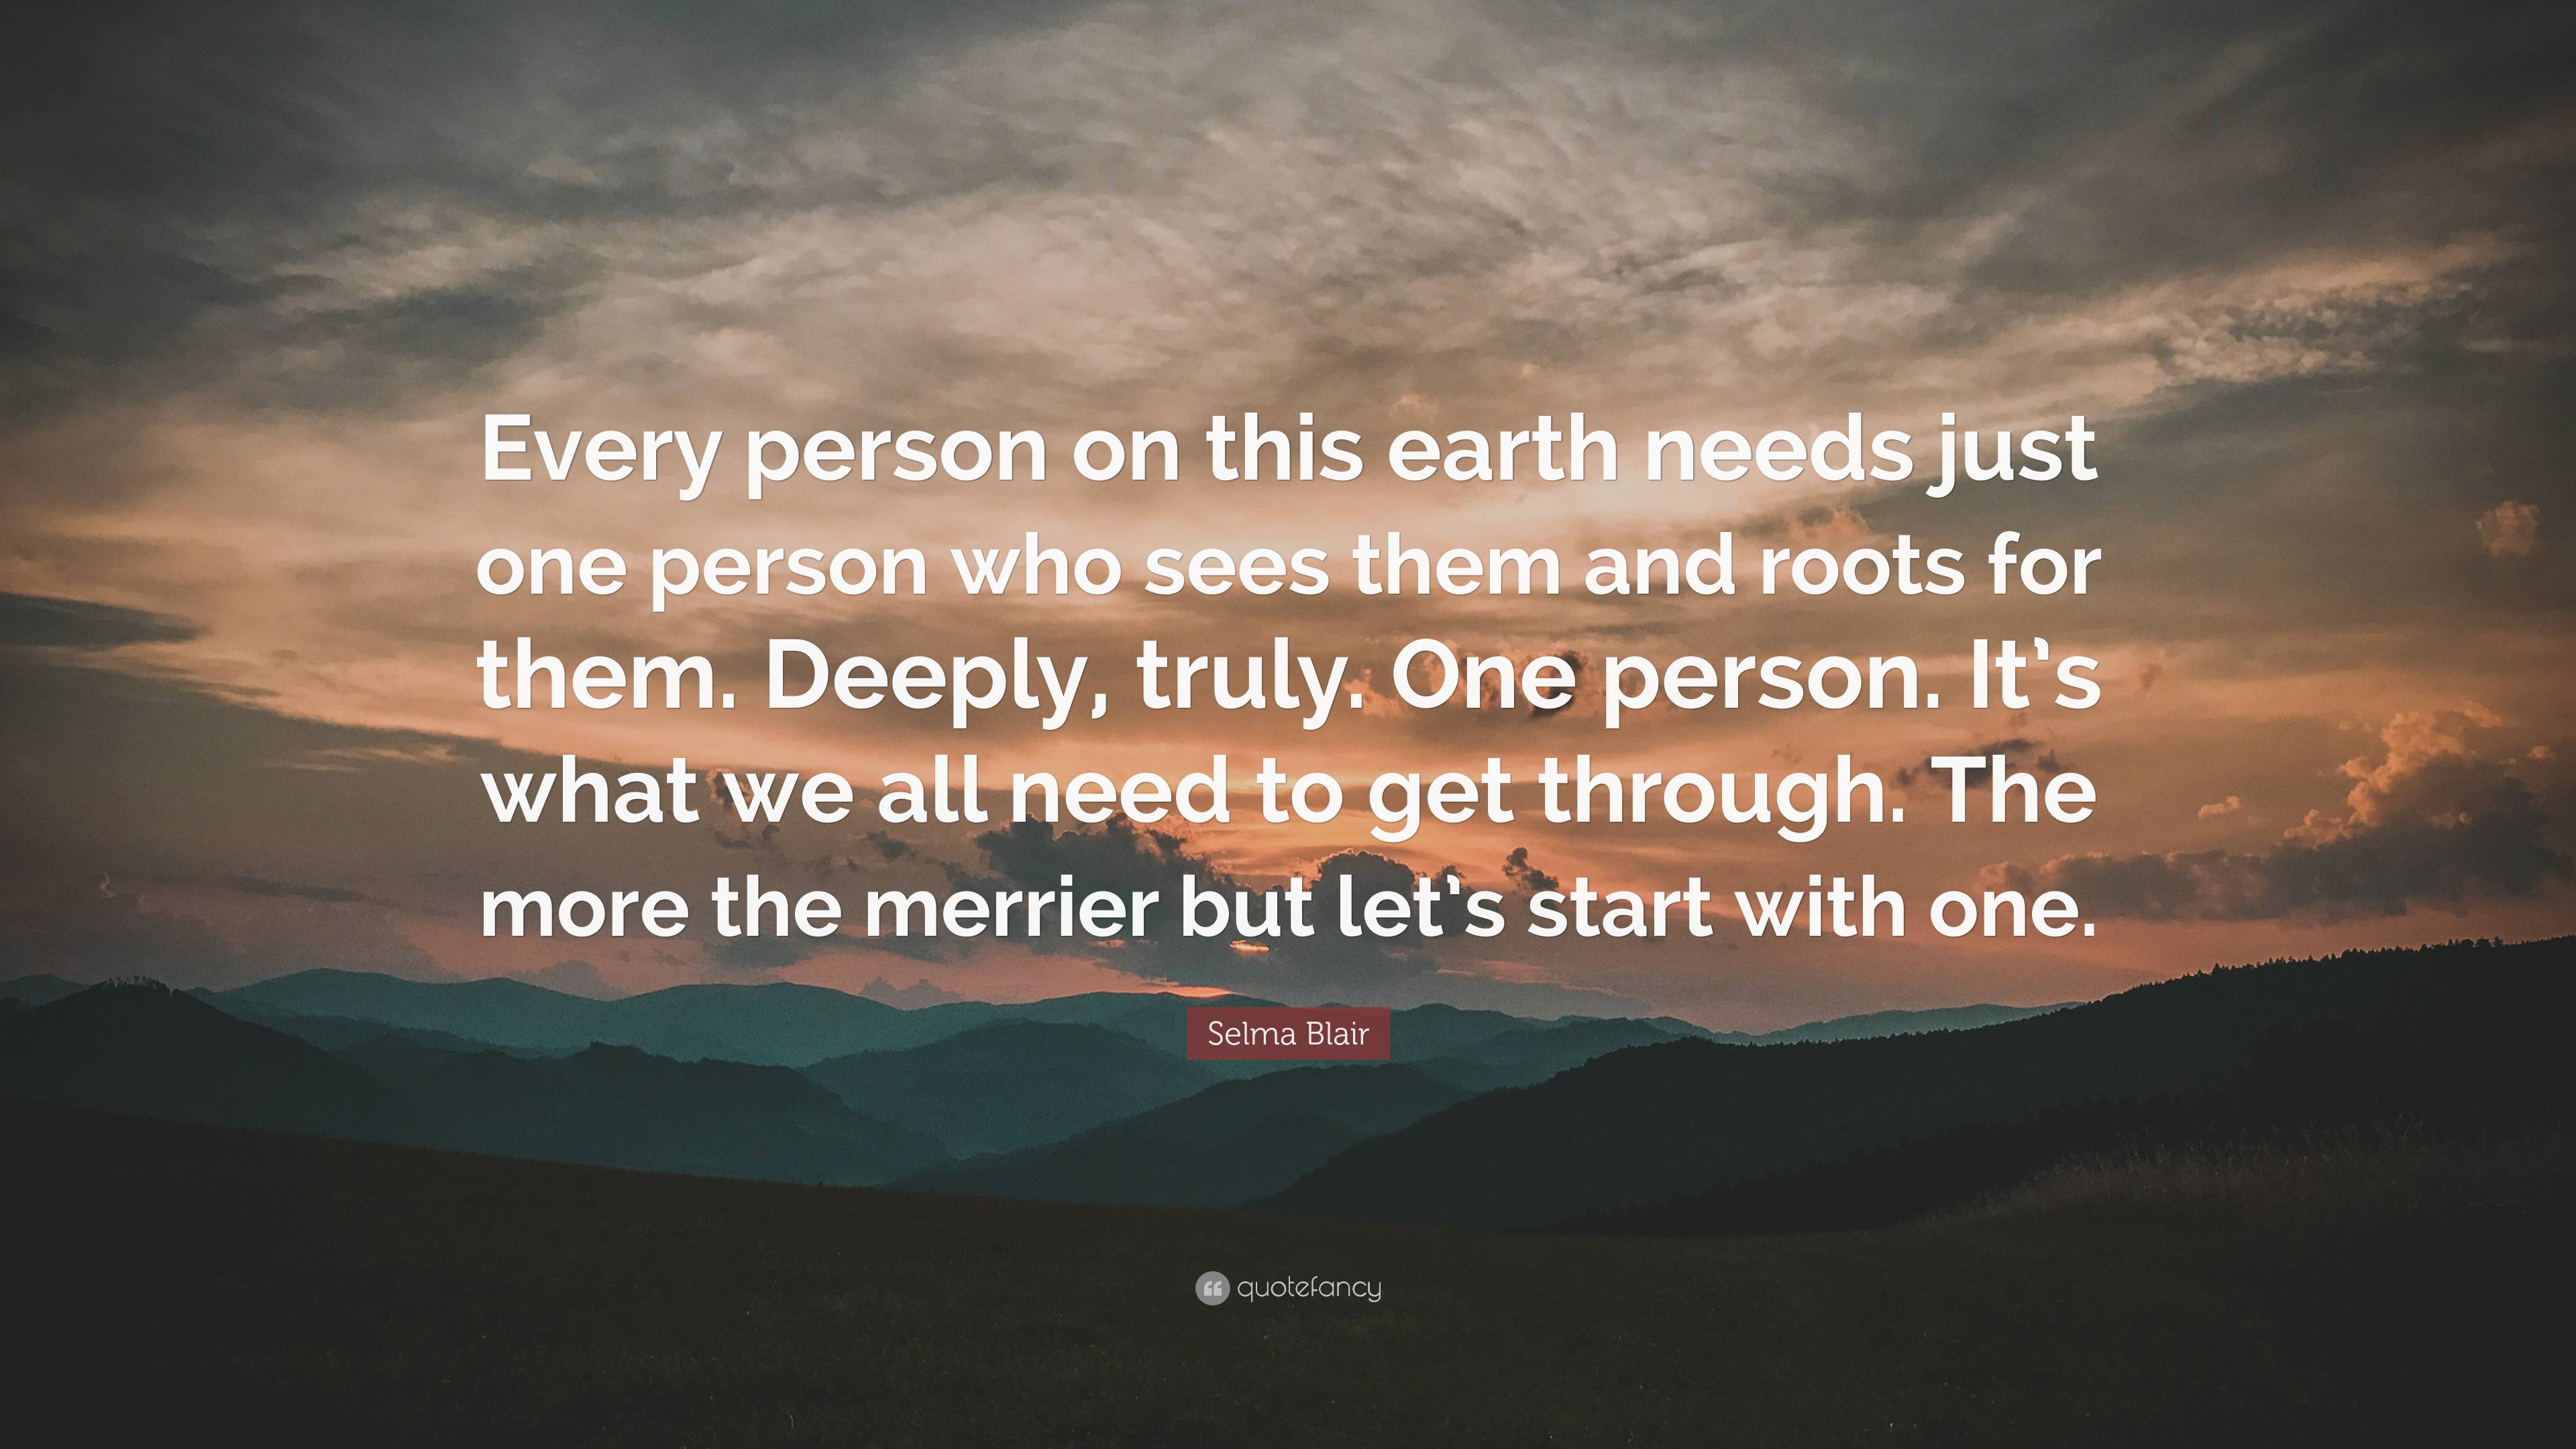 Selma Blair Quote: “Every person on this earth needs just one person ...